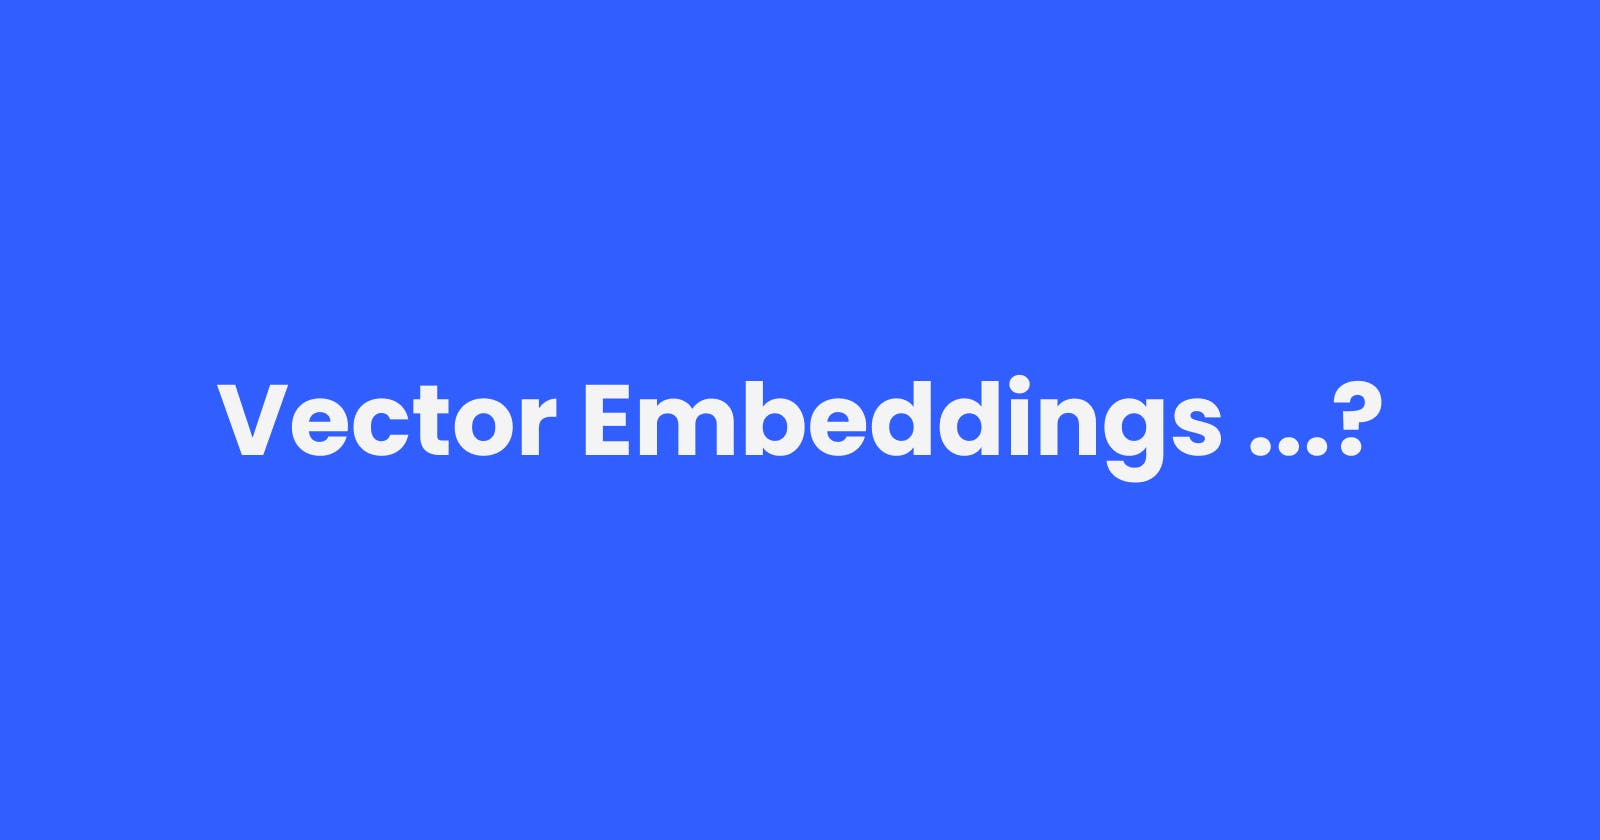 Vector Embeddings: A Deep Dive into Their Meaning, Mechanics, and Impact